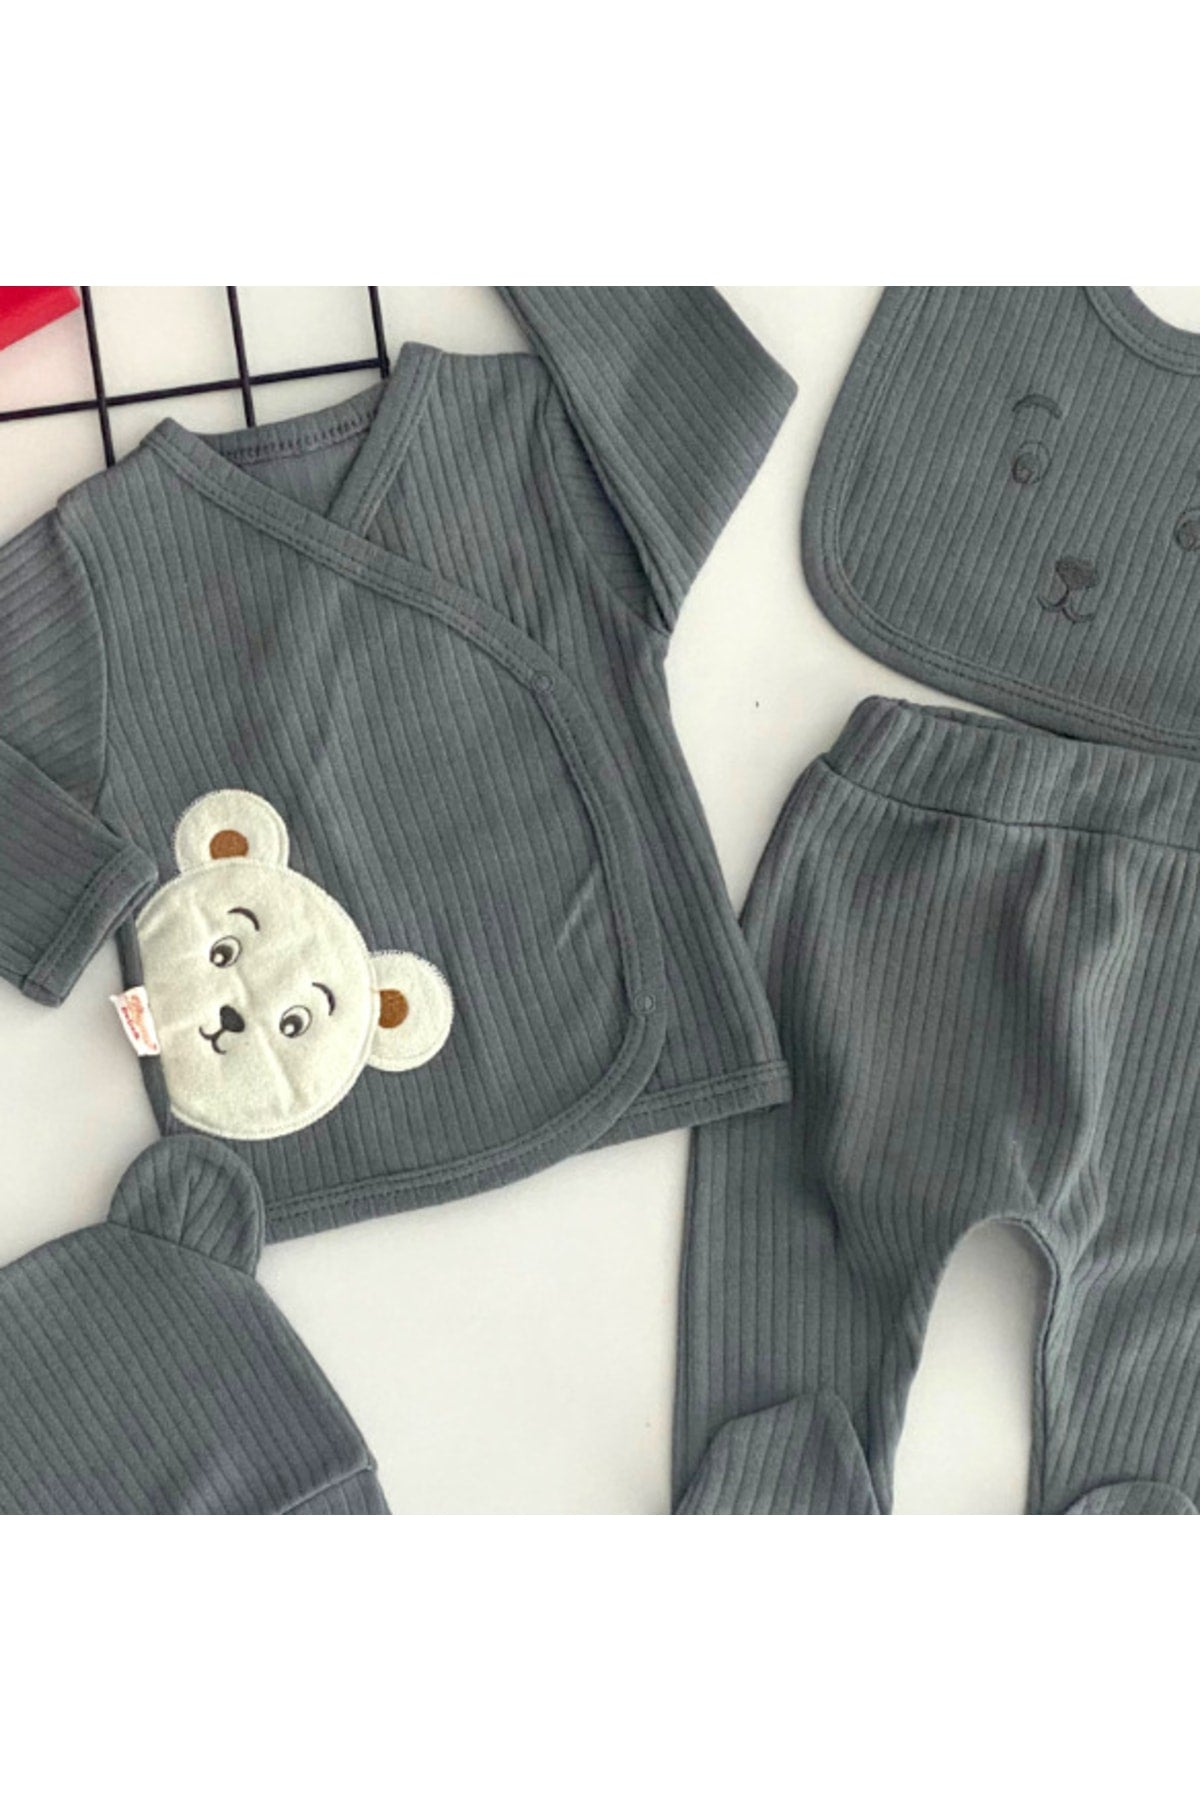 Cheerful Babies Organic Fabric Teddy Bear Embroidered Pattern 5 Pieces Hospital Outlet Set Gray